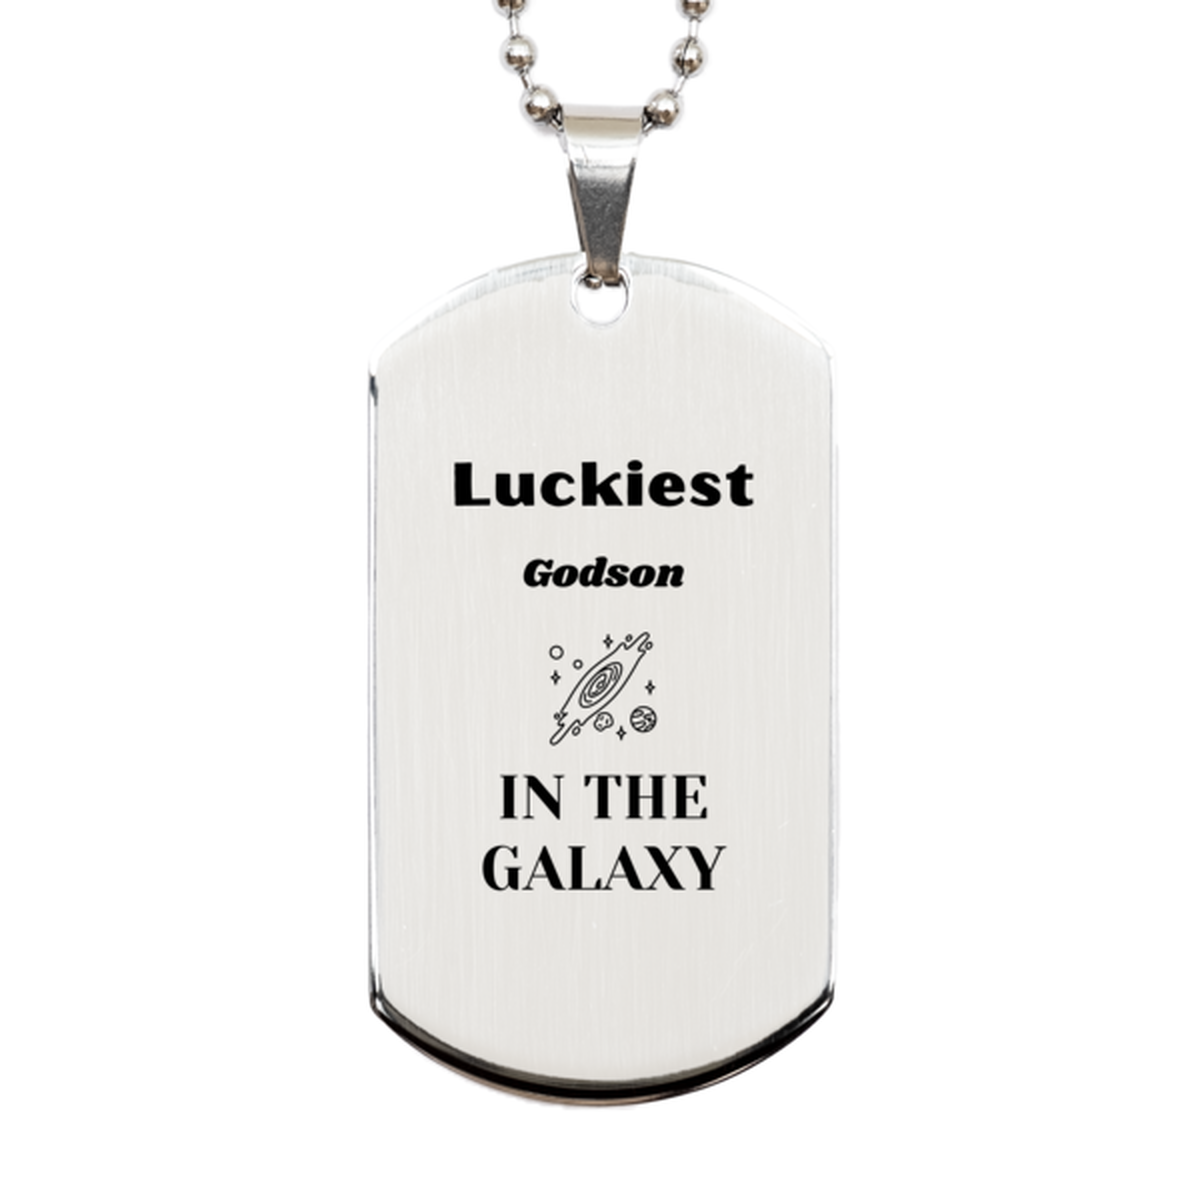 Luckiest Godson in the Galaxy, To My Godson Engraved Gifts, Christmas Godson Silver Dog Tag Gifts, X-mas Birthday Unique Gifts For Godson Men Women